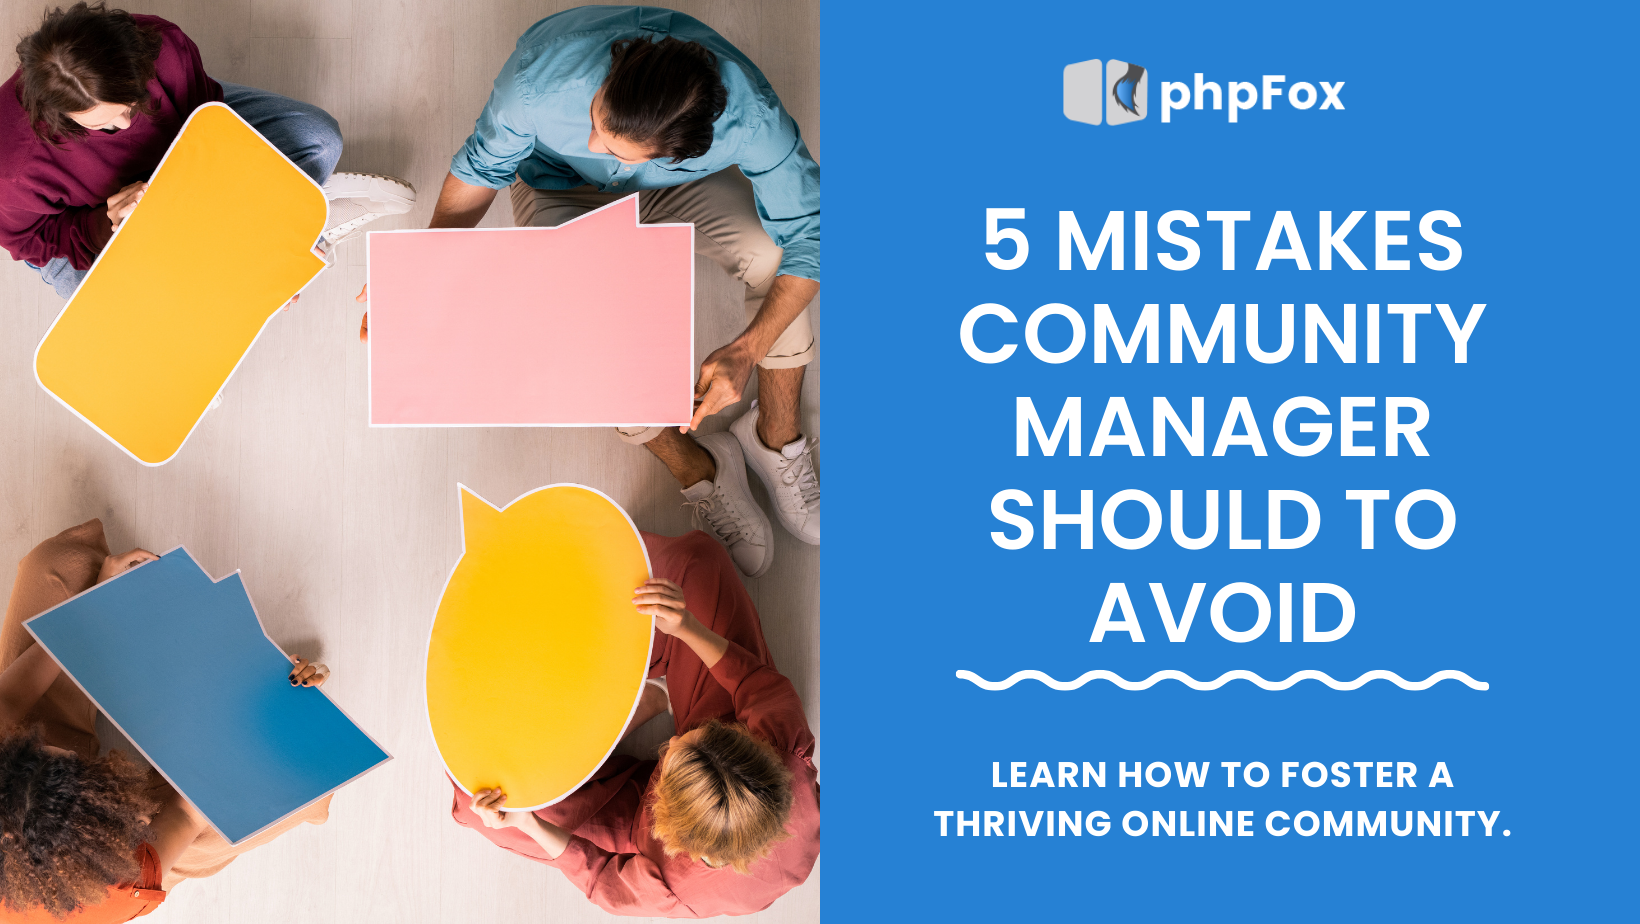 Avoid these 5 online community management mistakes